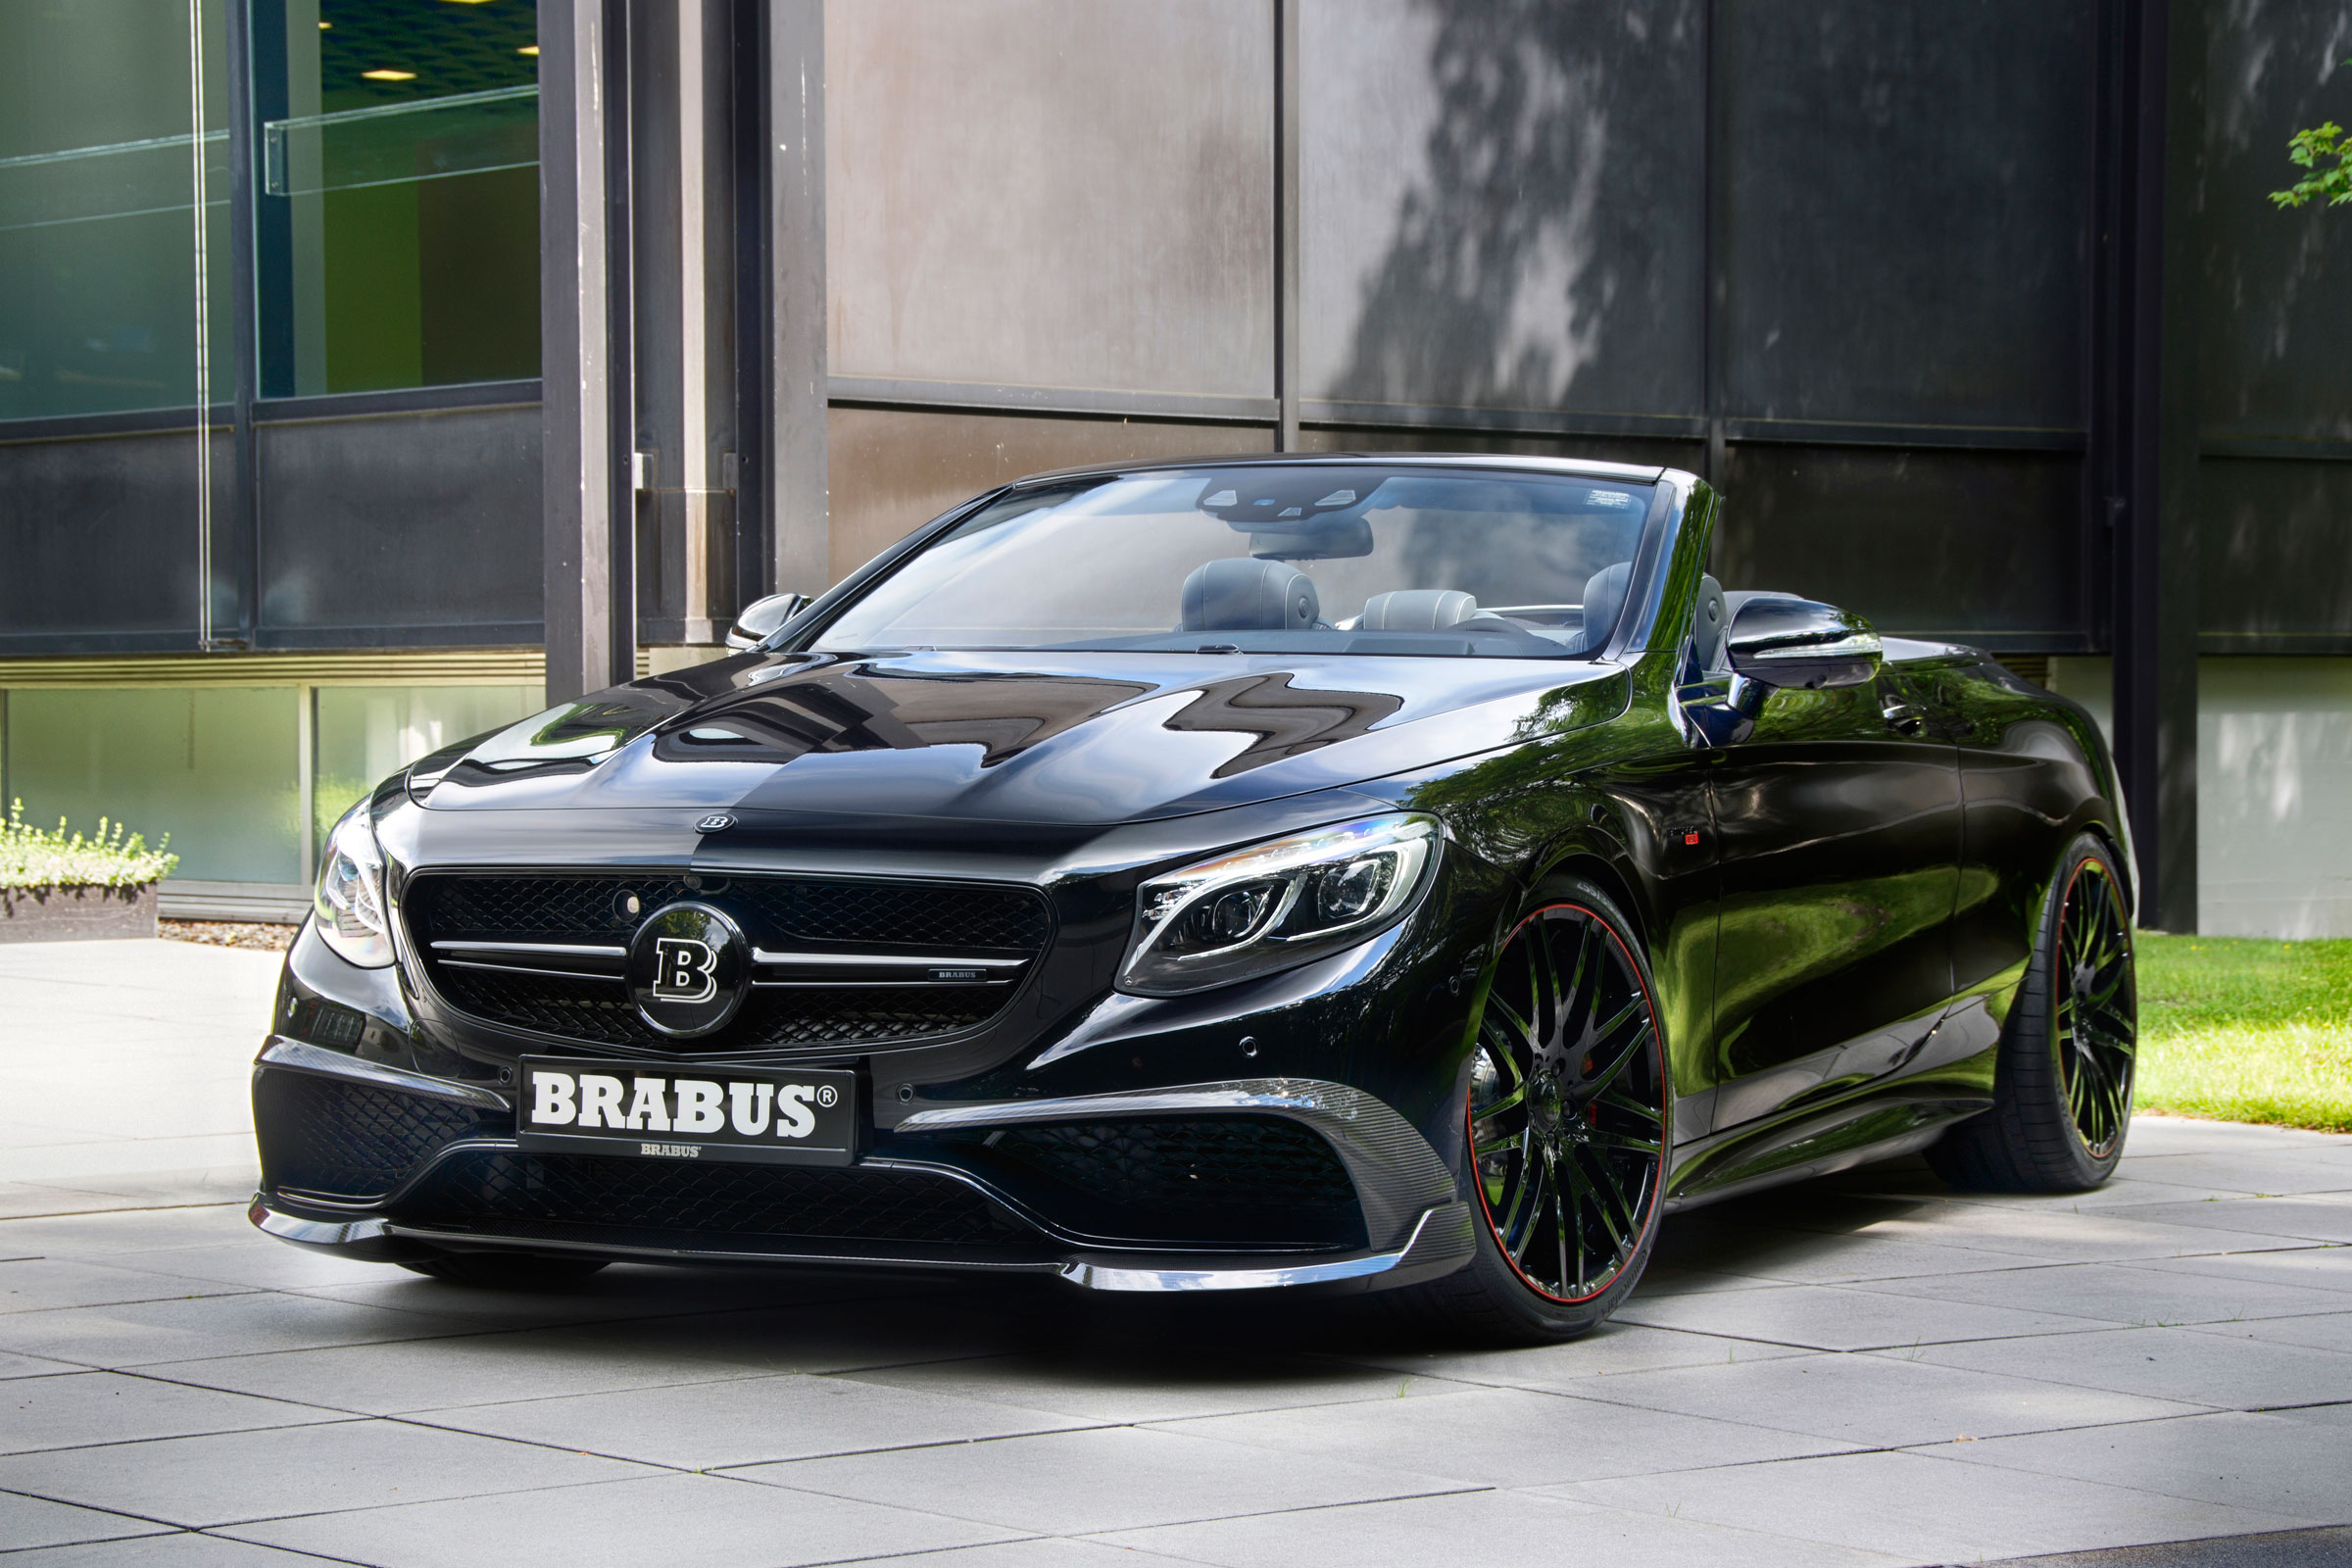 New Brabus 850 6 0 Biturbo Cabrio Is Fastest Most Powerful Drop Top Auto Express